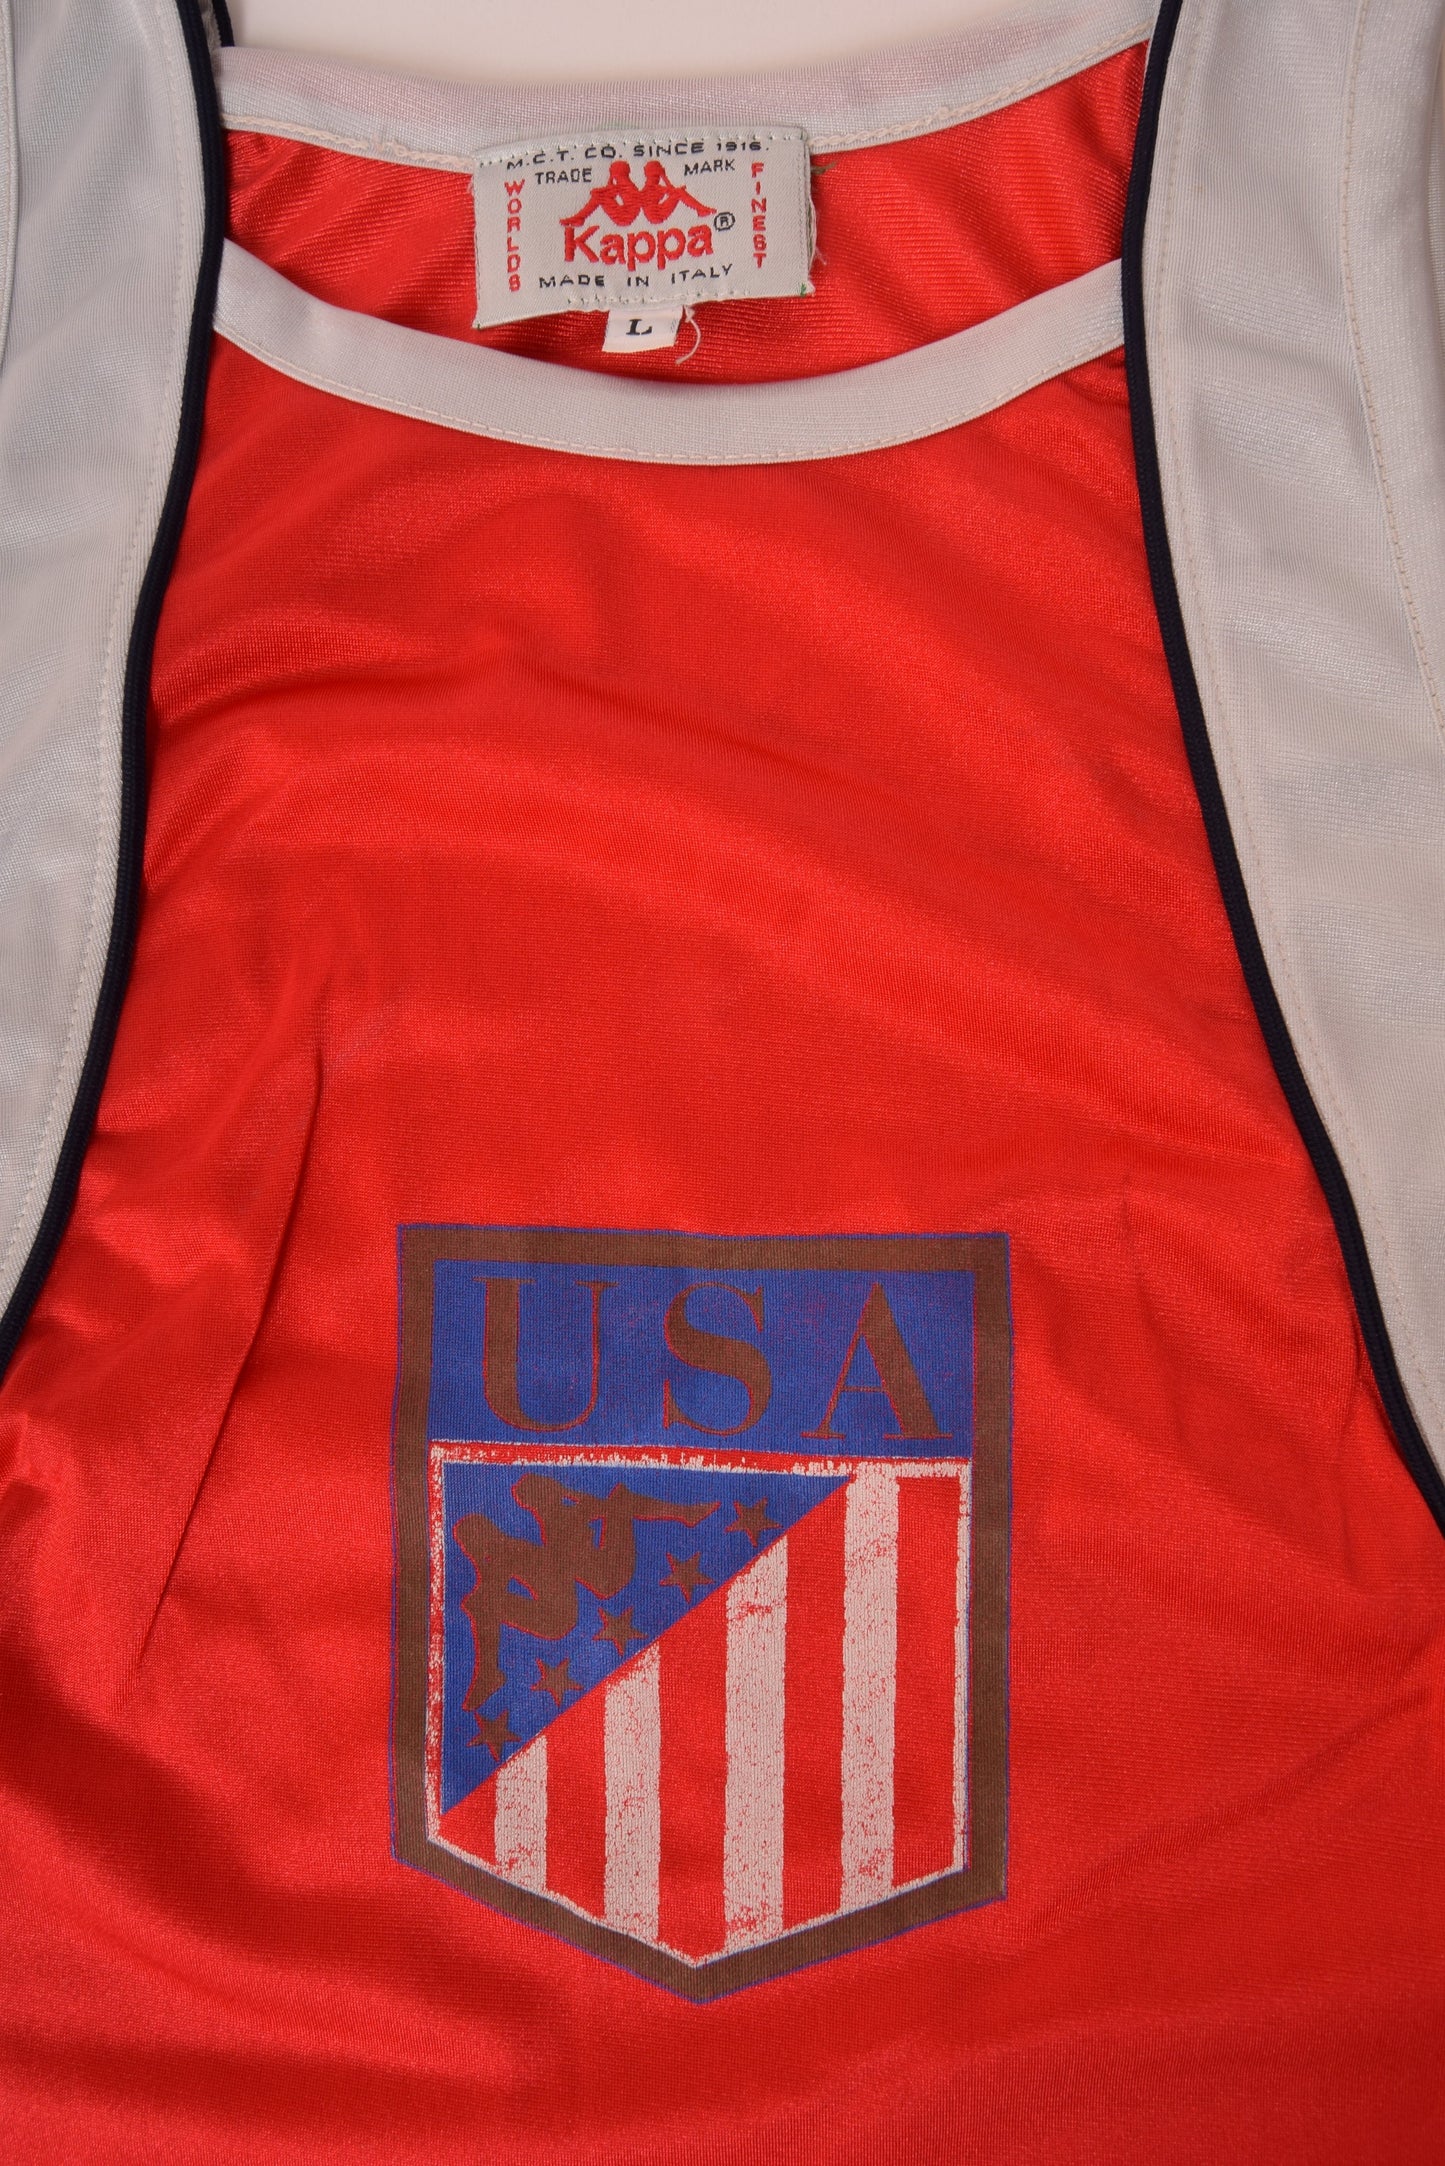 Vintage 80's USA Kappa Track & Field Tank Top Los Angeles Olympic 1984 Made in Italy Red Grey